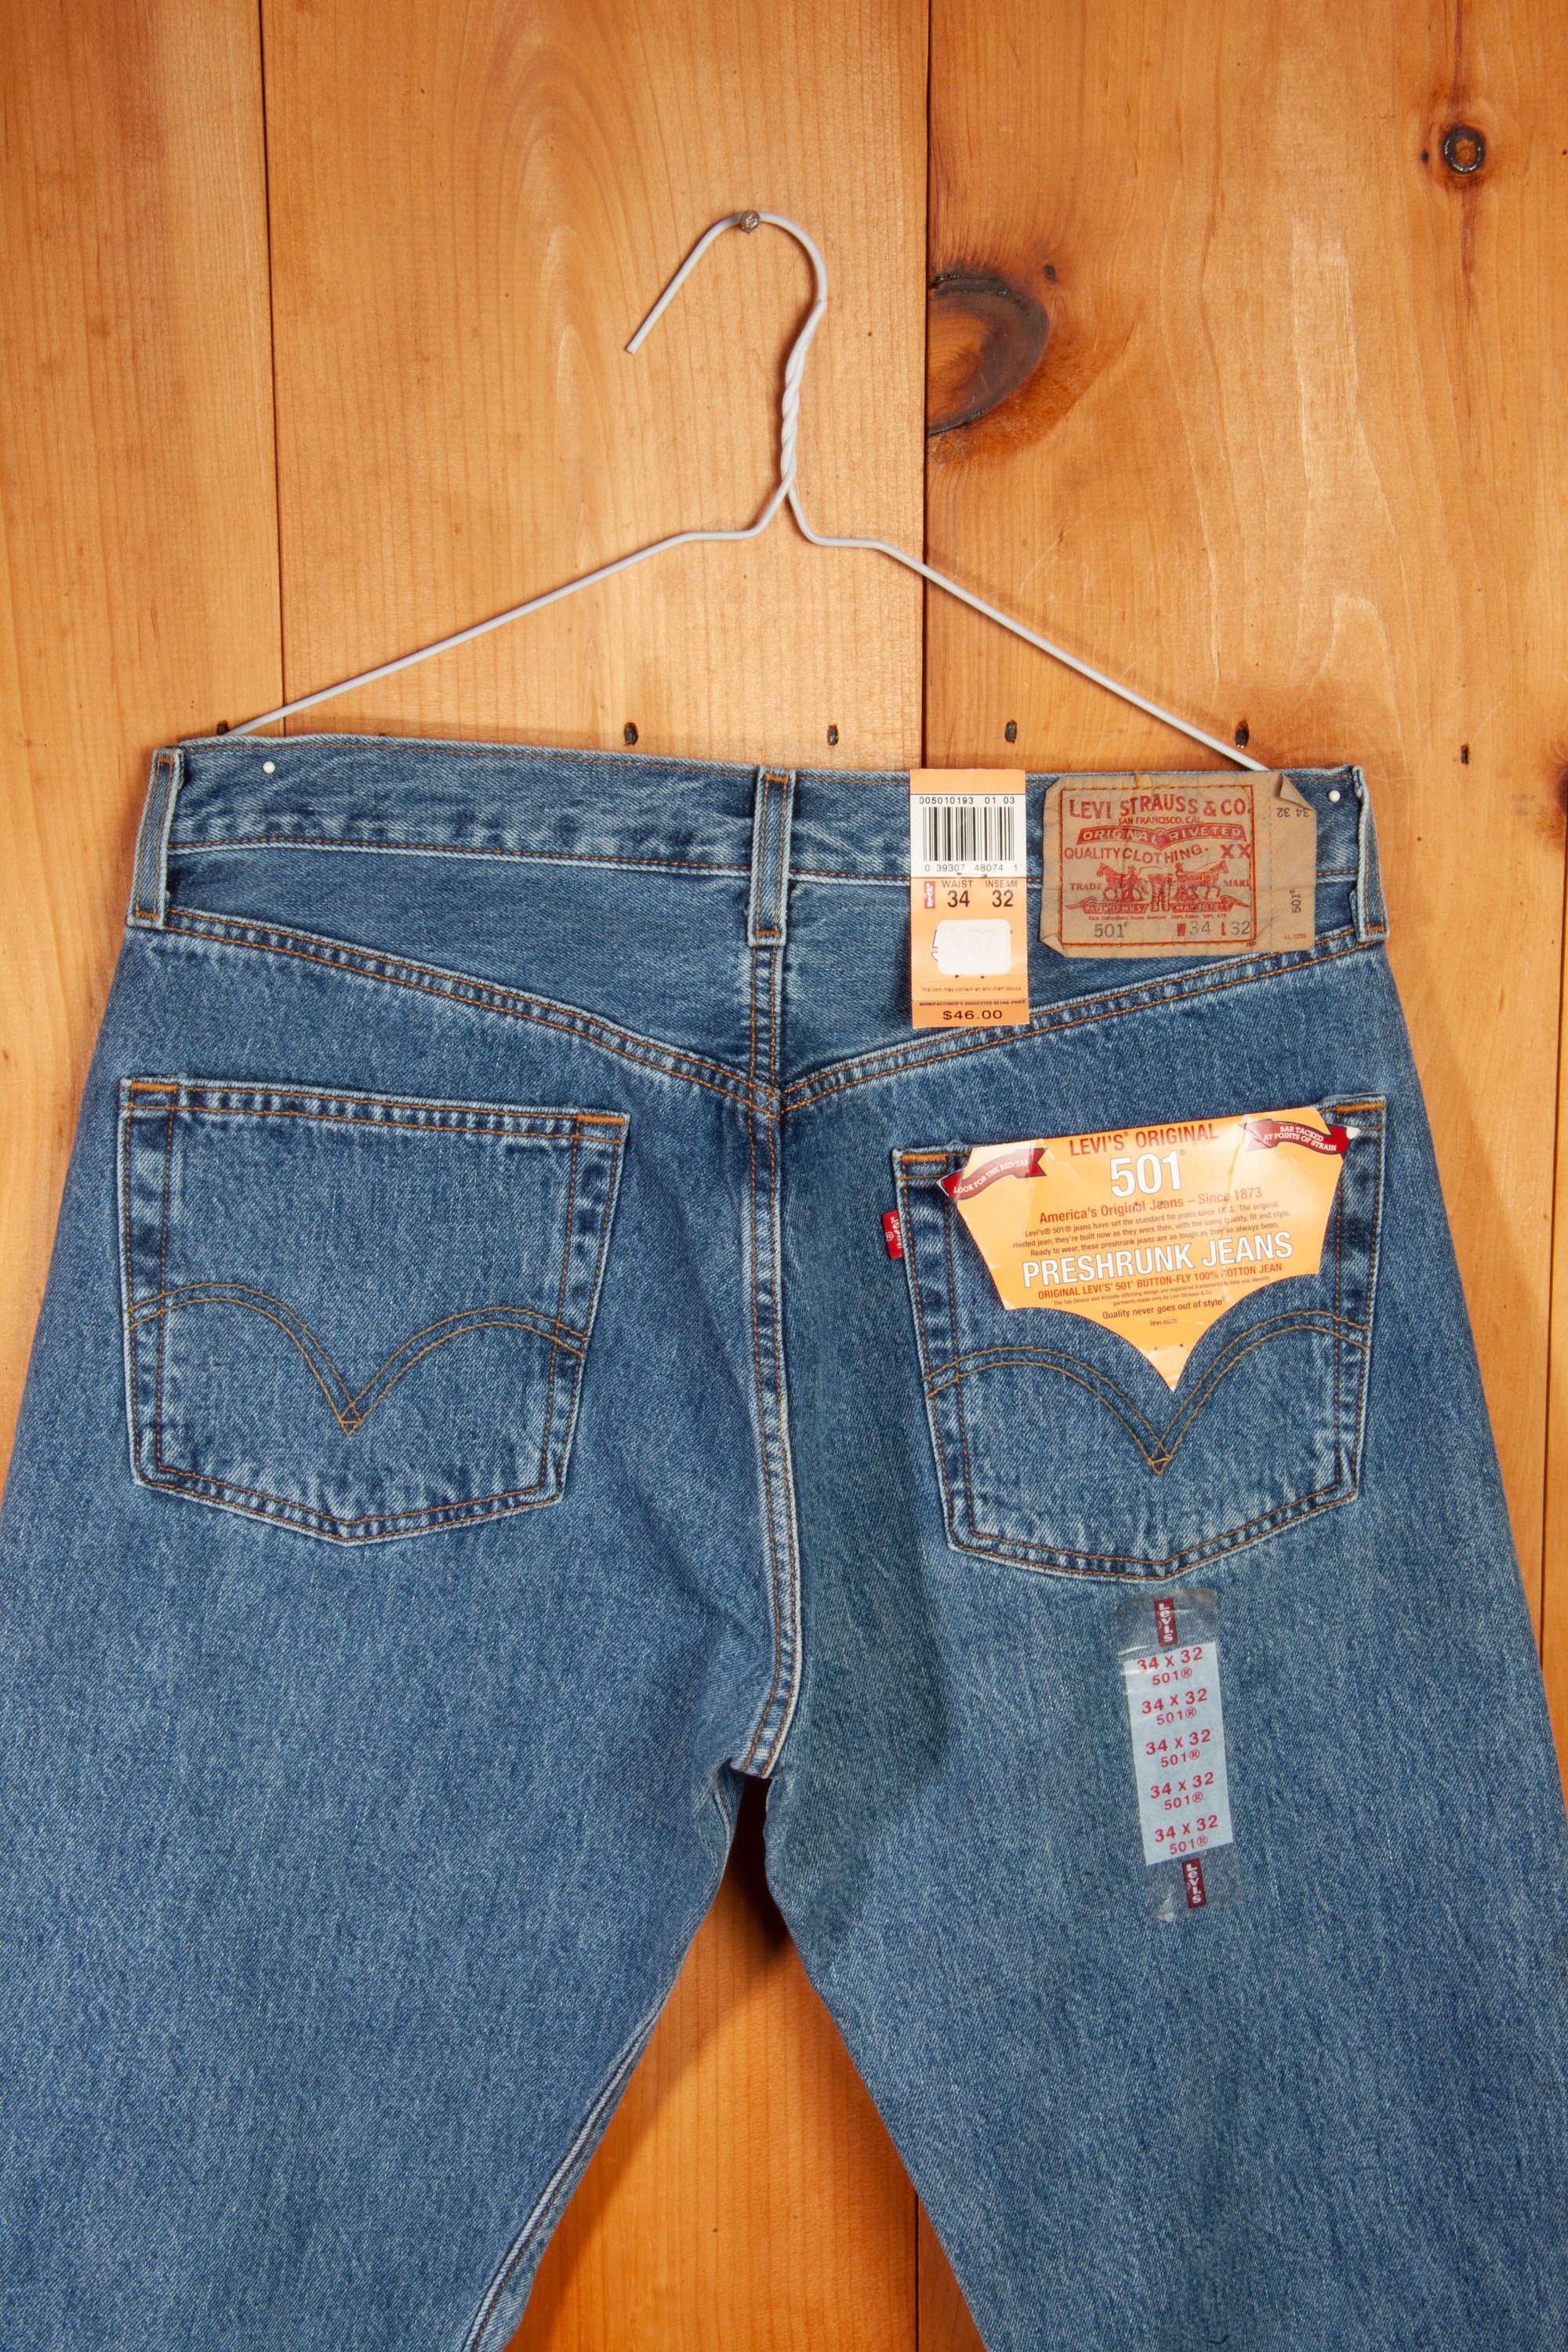 Levis 501 Jeans Deadstock with Original Tags X 32 - Etsy